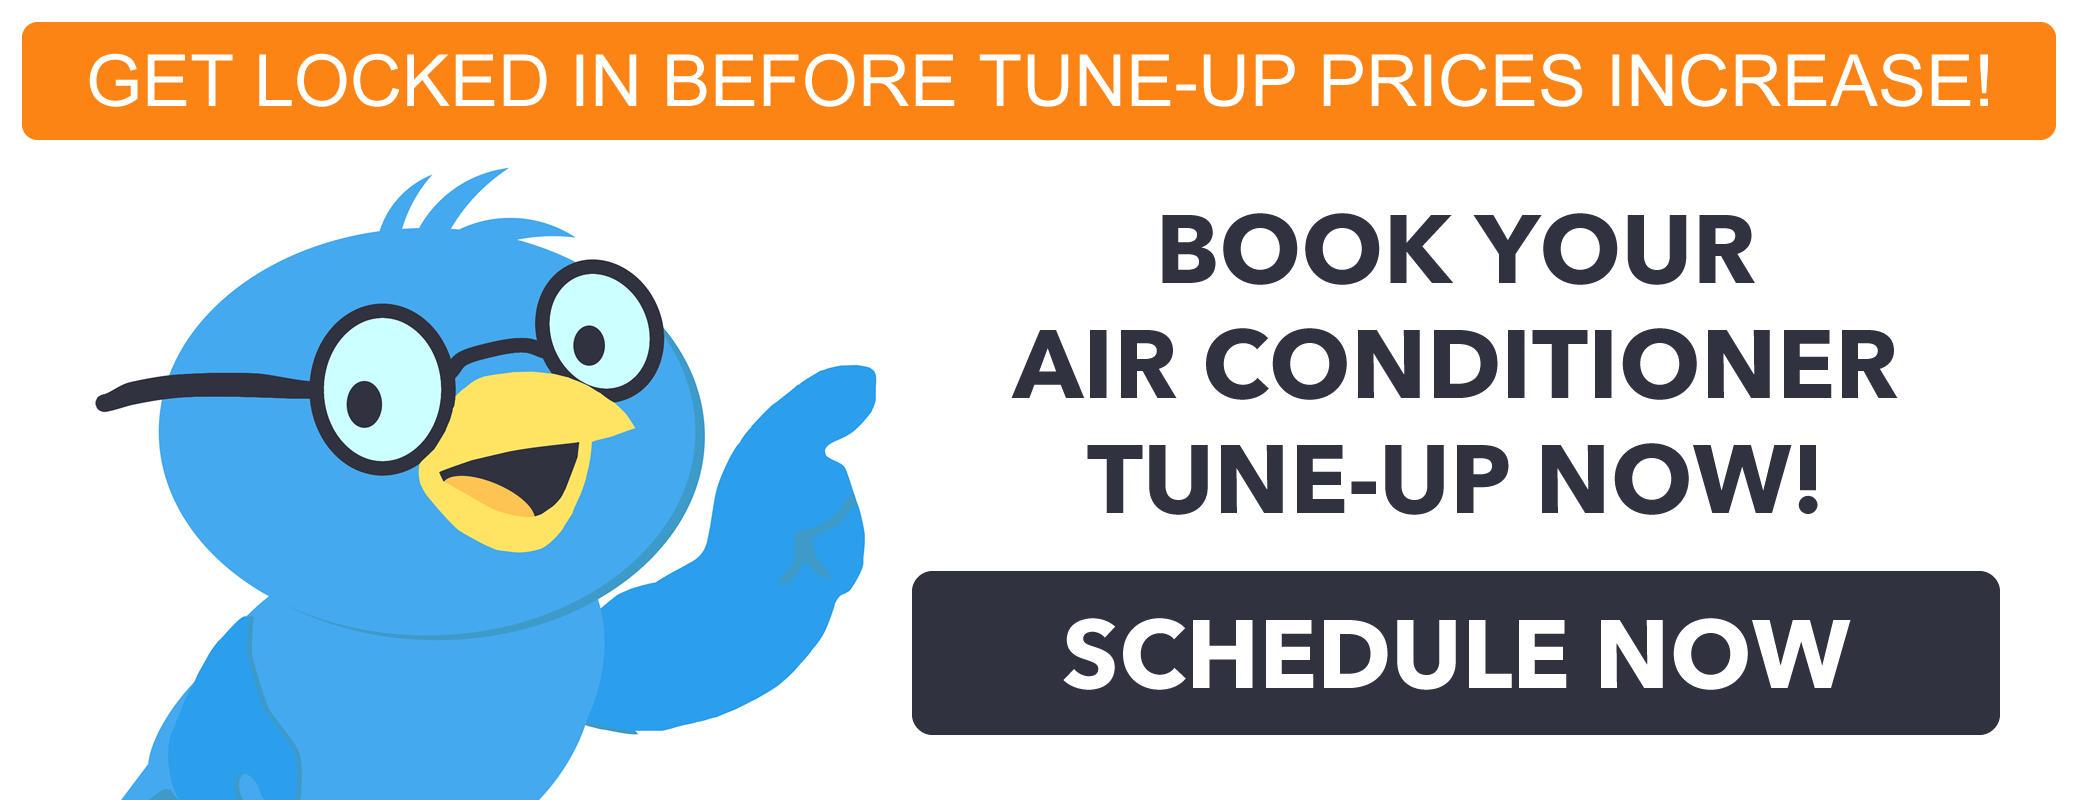 Get locked in before tune-up prices increase in June! Book your Air Conditioner Tune-Up now! Schedule now (Button)